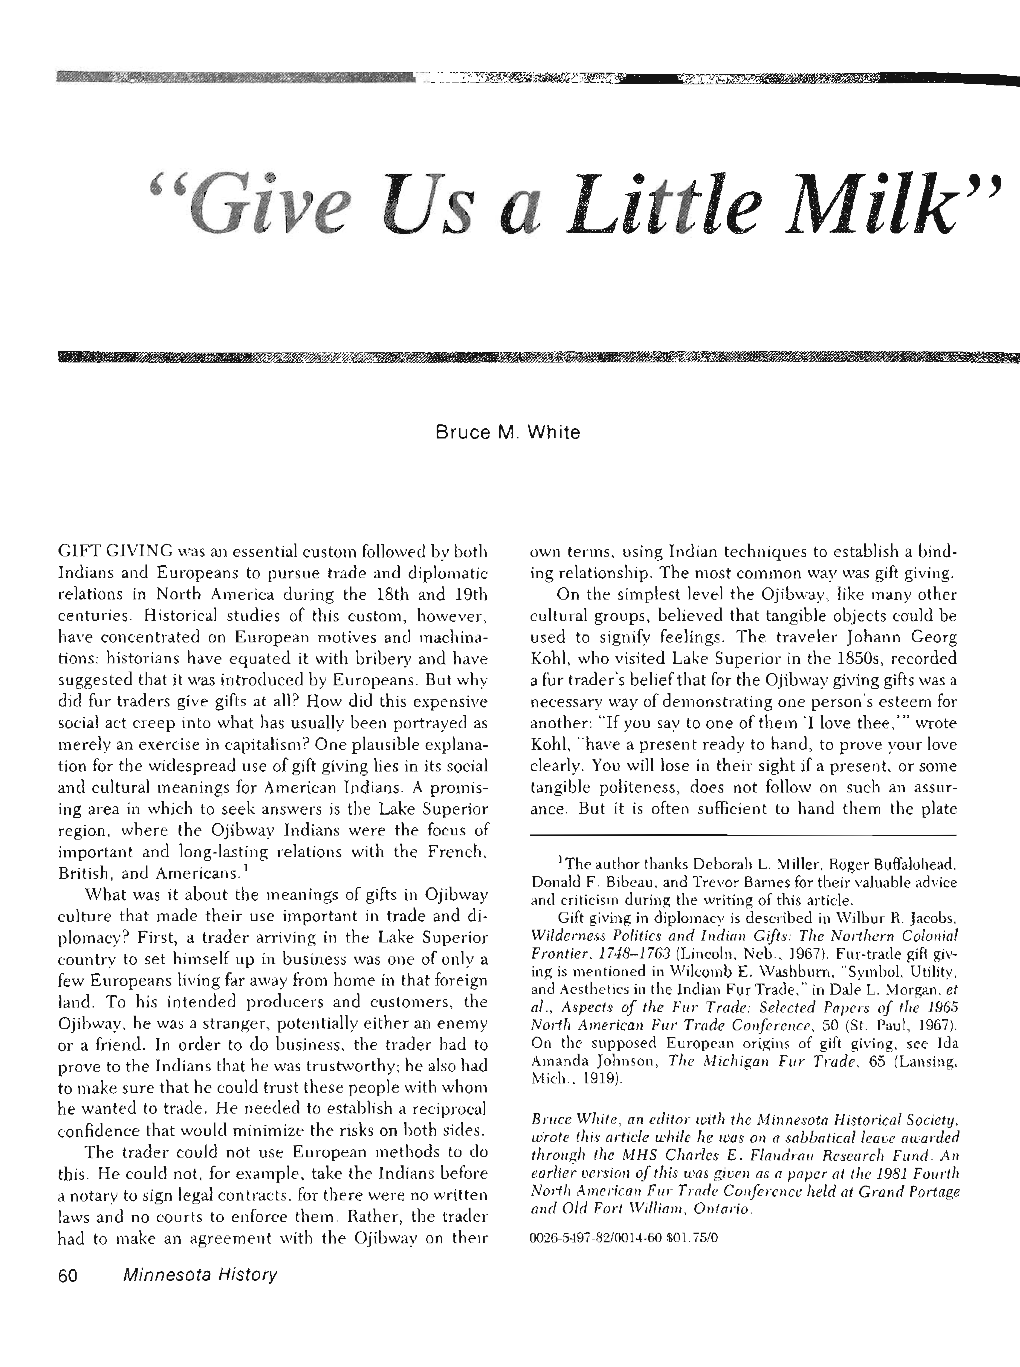 Give Us a Little Milk" : the Social and Cultural Meanings of Gift Giving In